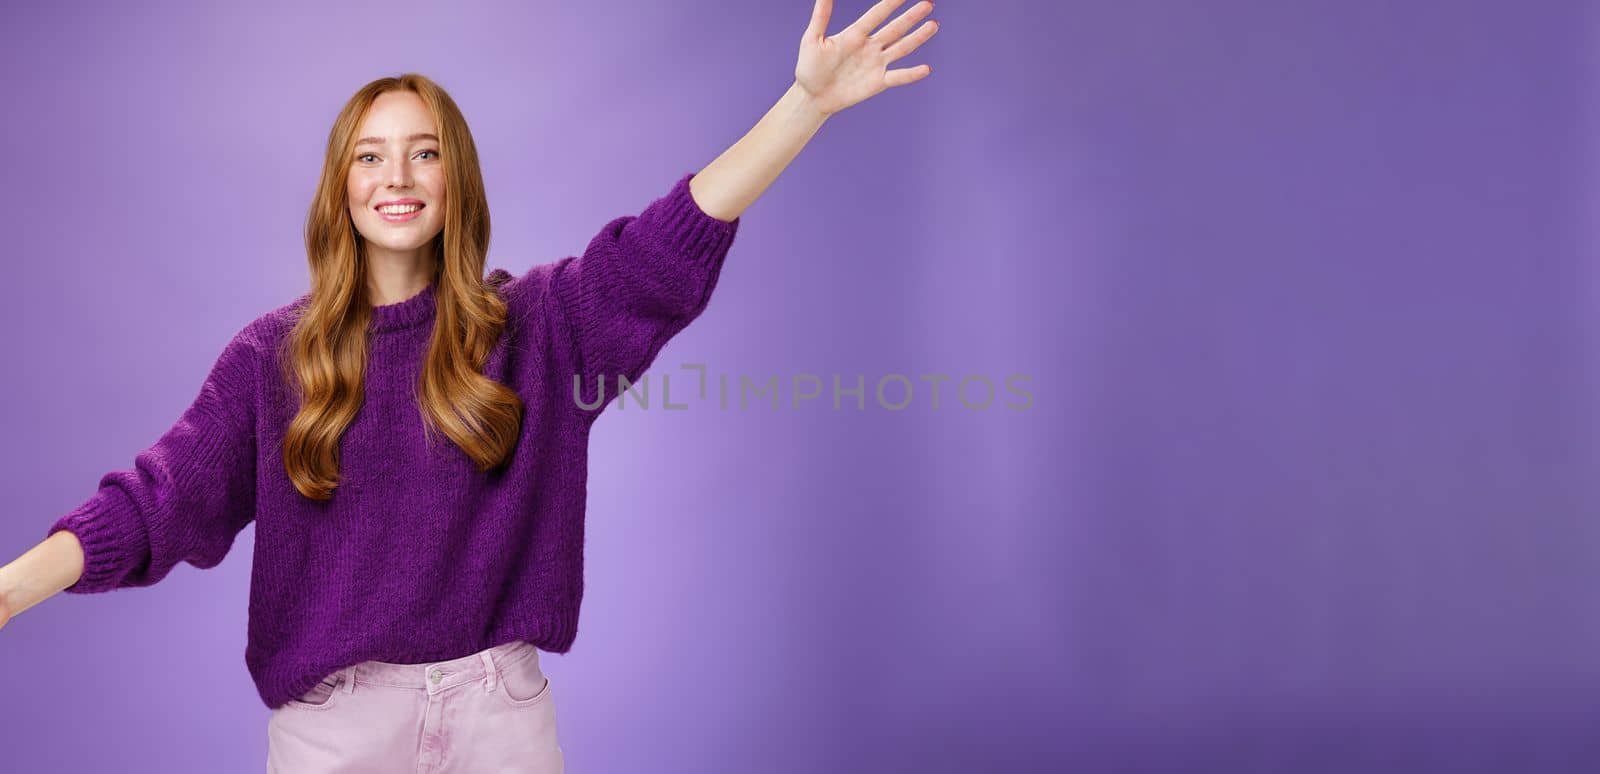 Girl stretched hands sideways to welcome and greet friend giving warm hug smiling broadly at camera standing joyful wanting cuddle over purple background, wearing violet sweater and pants by Benzoix